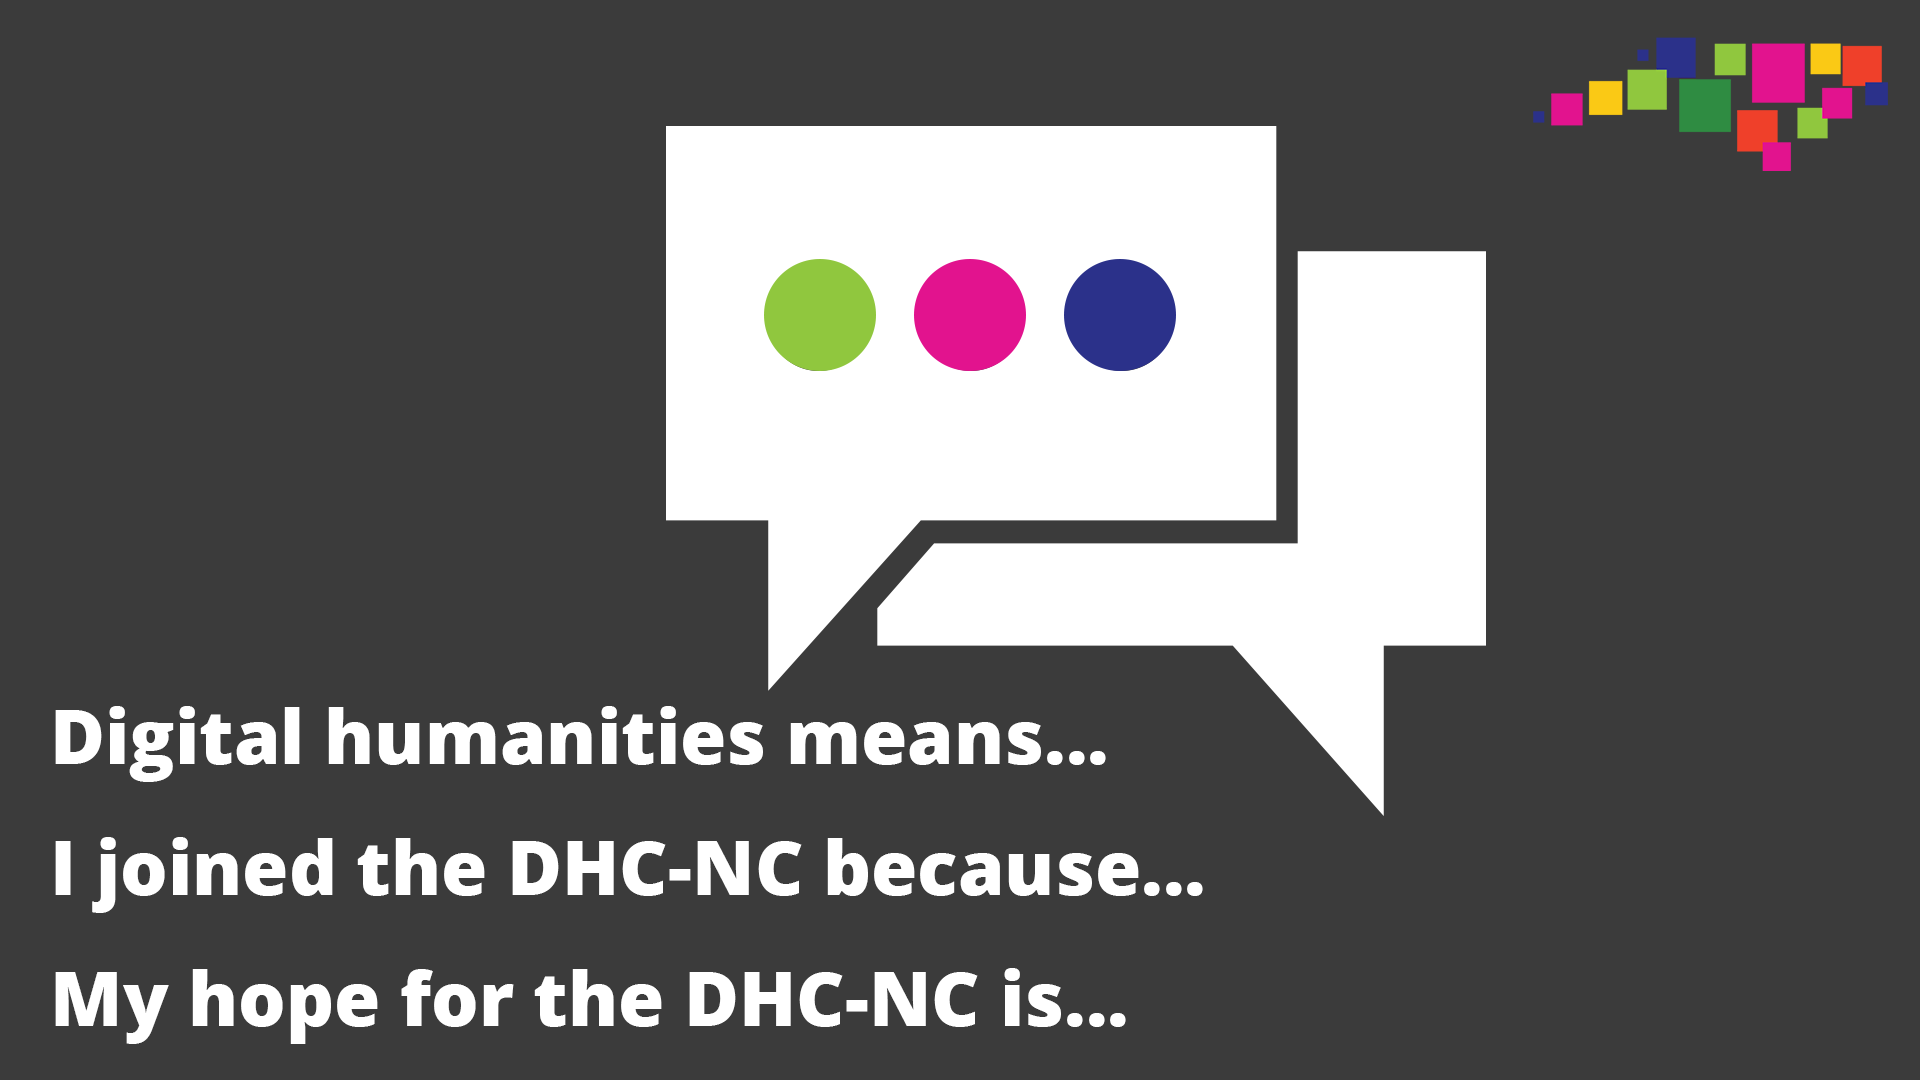 A white, double-layed speech bubble is on a dark gray background. Under the speech bubble are three prompts in white text. The first prompt is "Digital humanities means..." The second prompt is "I joined the DHC-NC because..." The third prompt is "My hope for the DHC-NC is..."